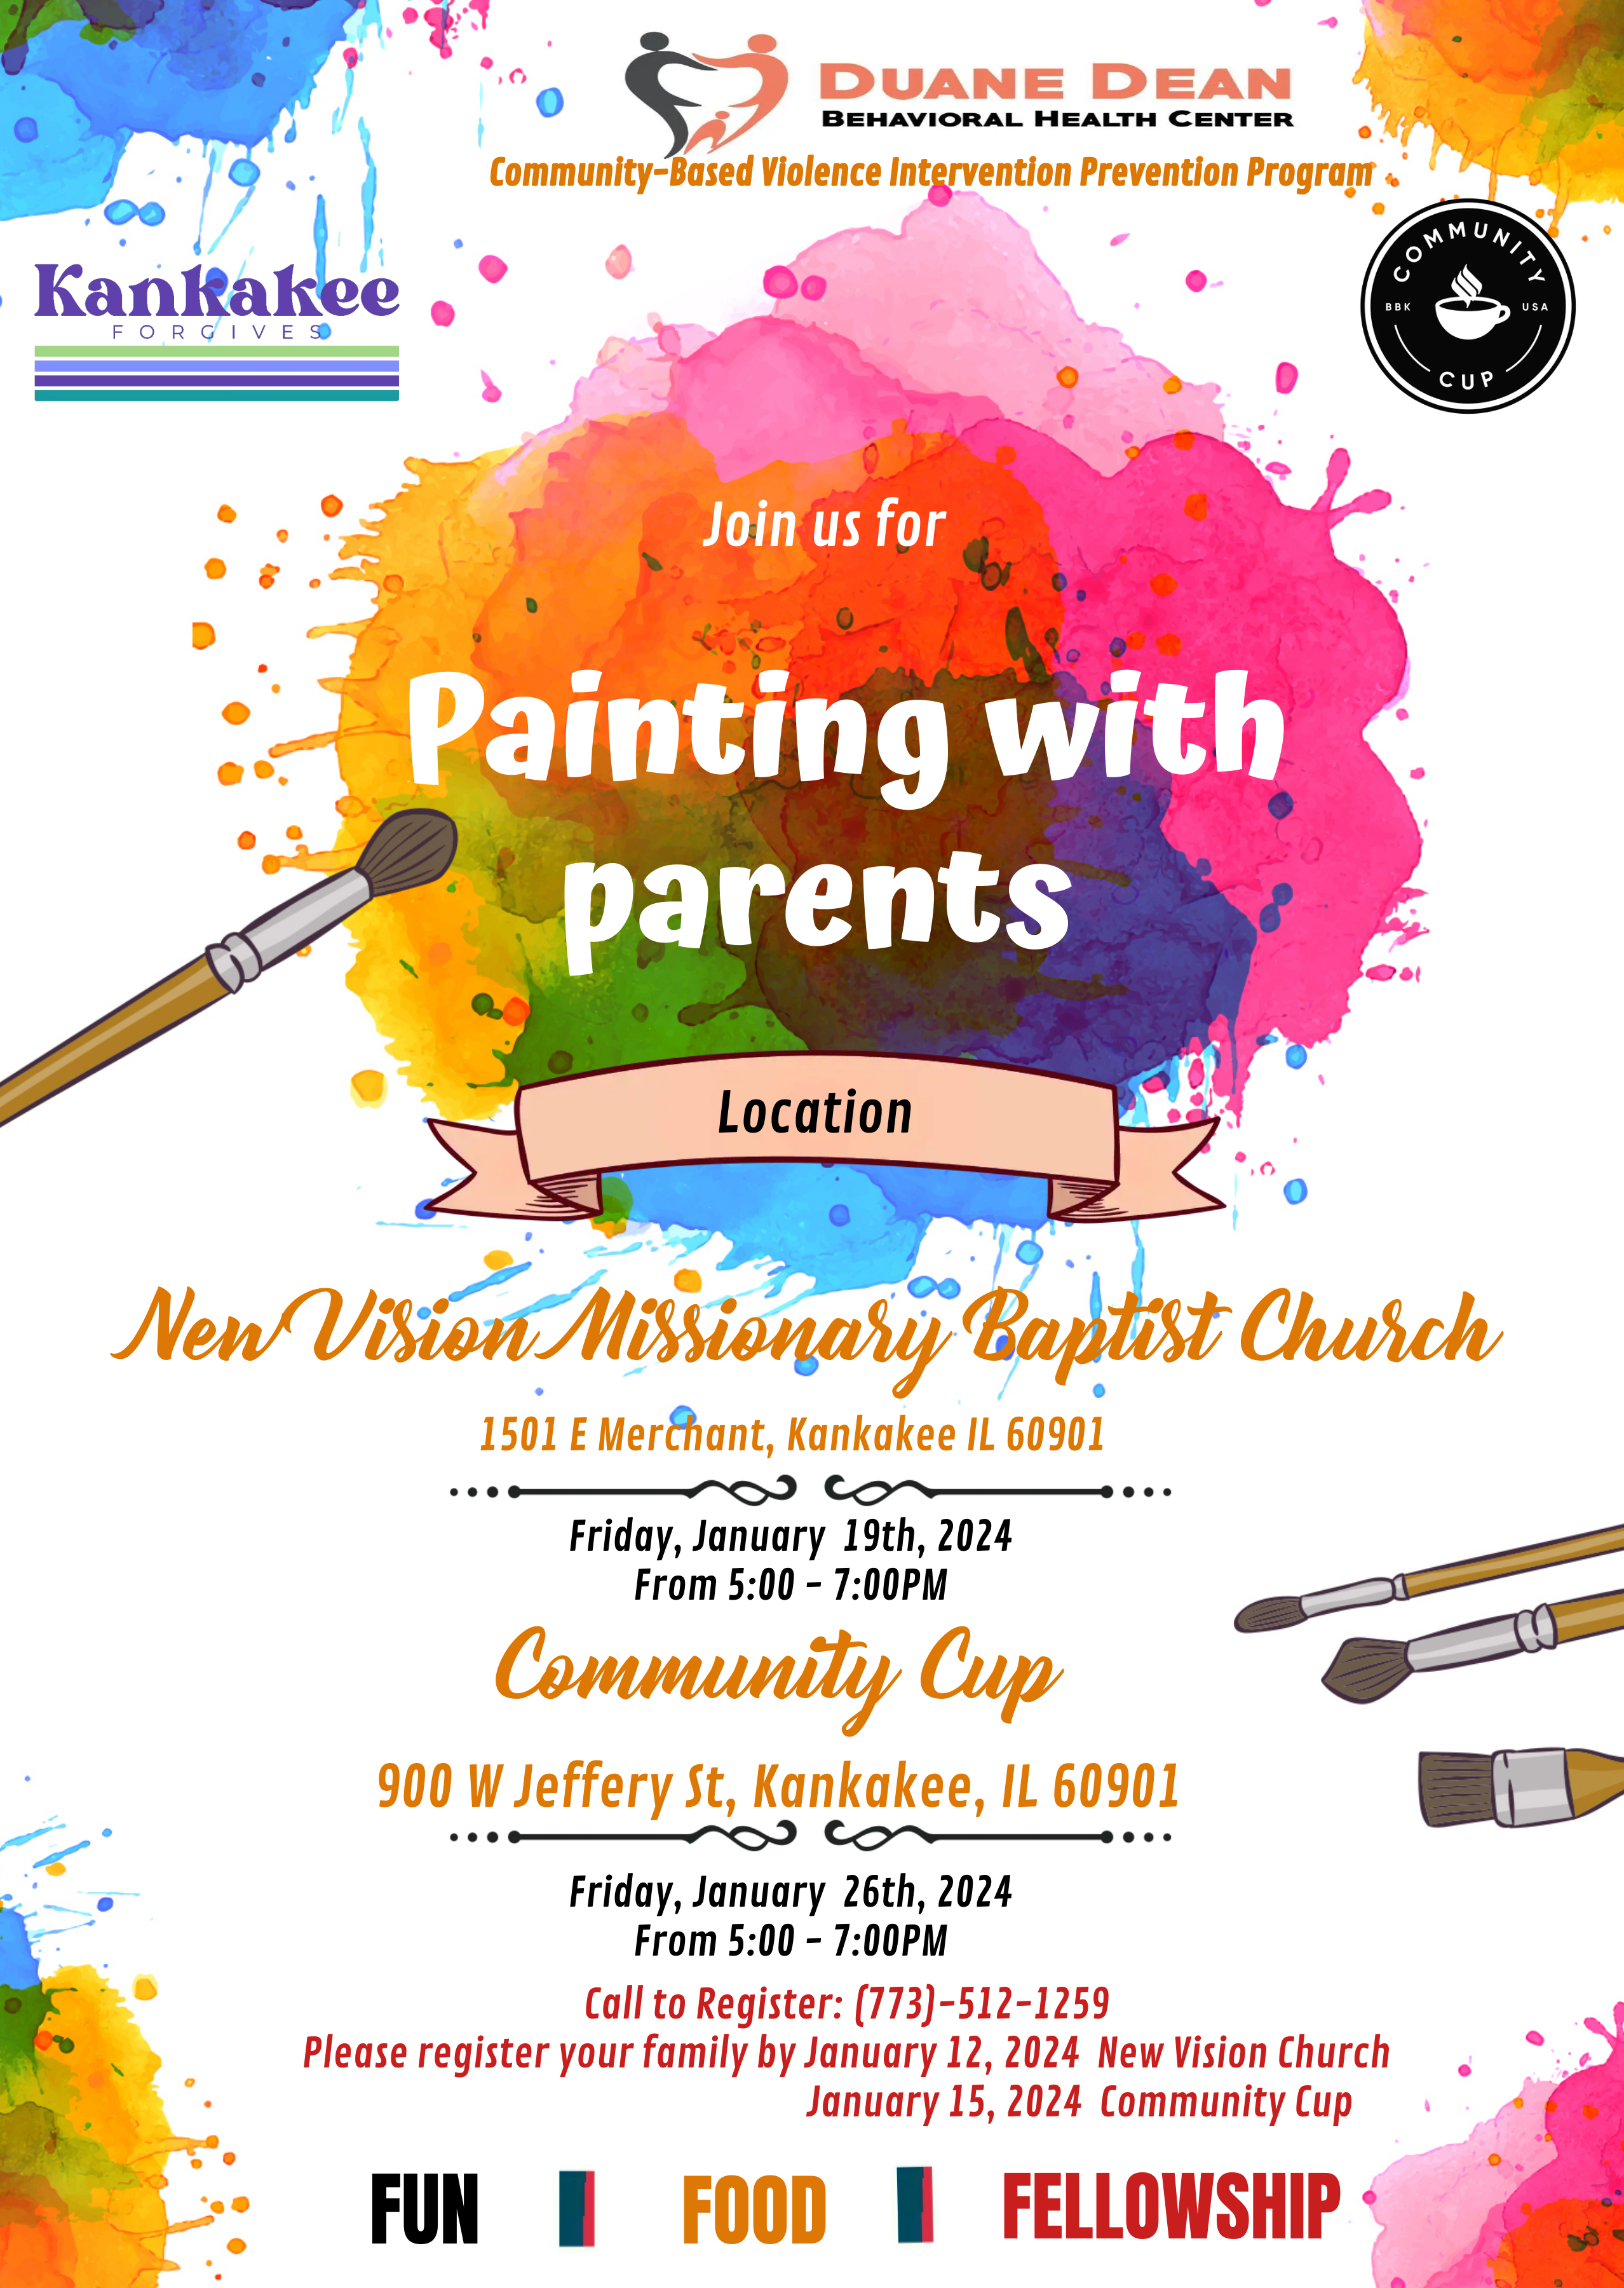 Painting with Parents - Activity workshop evening with children and Parents